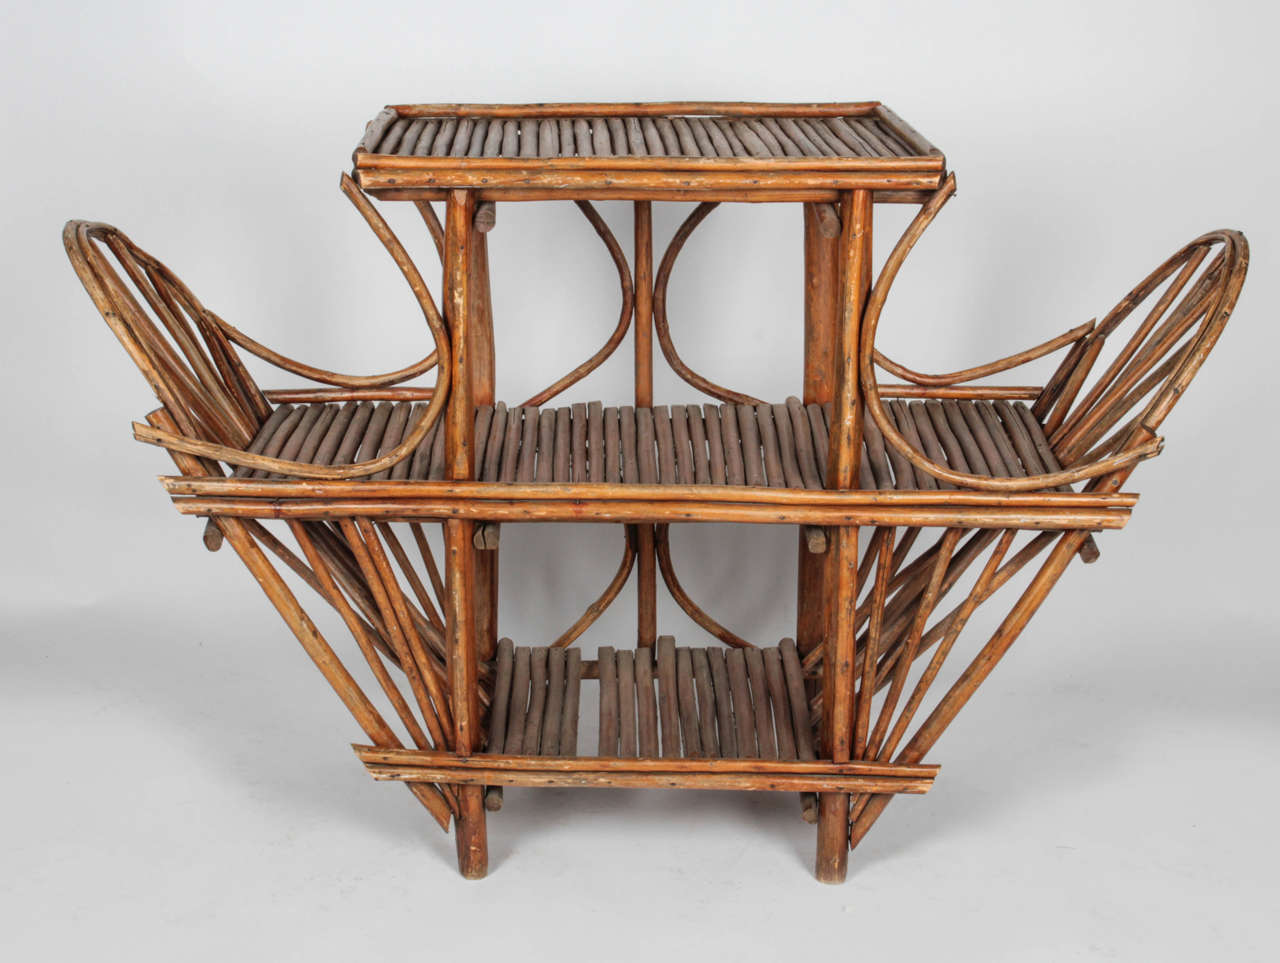 A very unique addition to your pool side, this bentwood stand would look great filled with rolled towels. One wood slat missing on the bottom shelf (see pictures)

Not available for sale or to ship in the state of California.